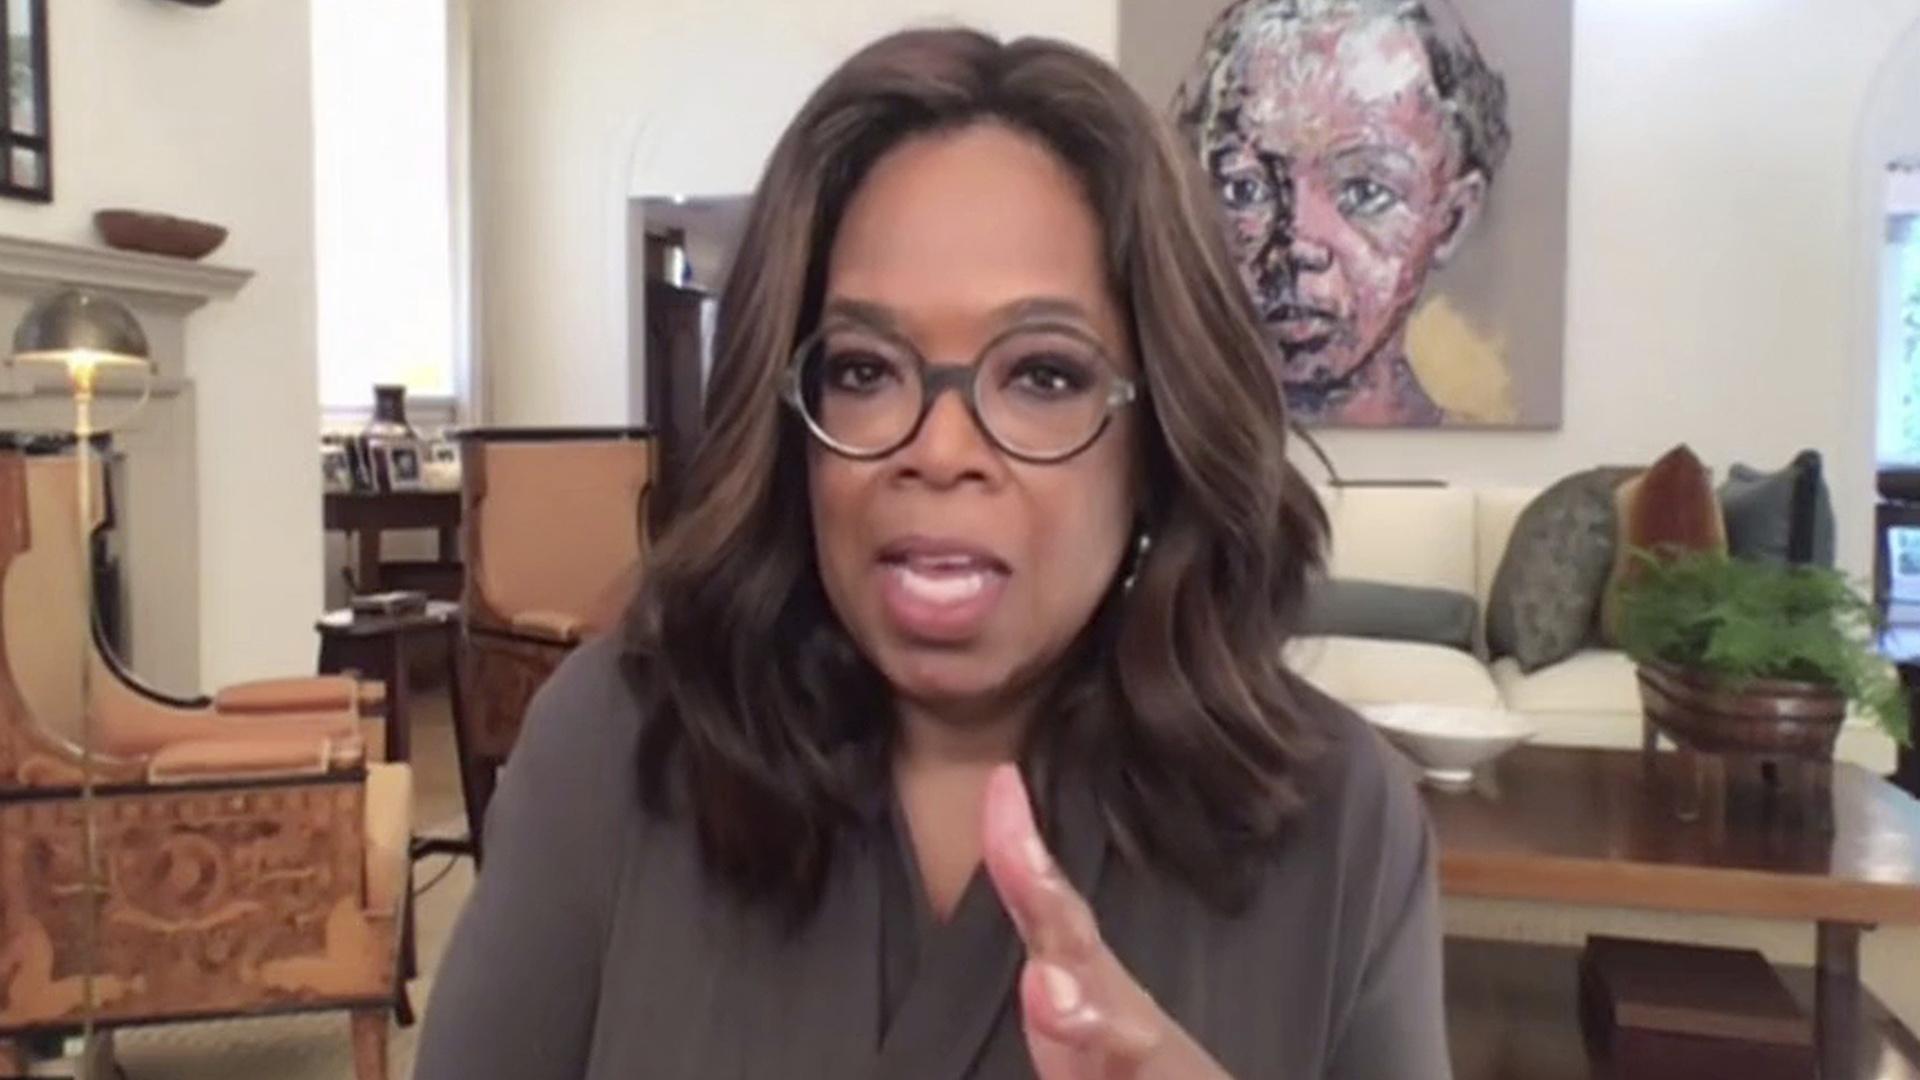 In a photo provided by The Call to Unite, Oprah Winfrey speaks during the 24-hour live event, which was transmitted Friday, May 1, 2020. (The Call to Unite via AP)